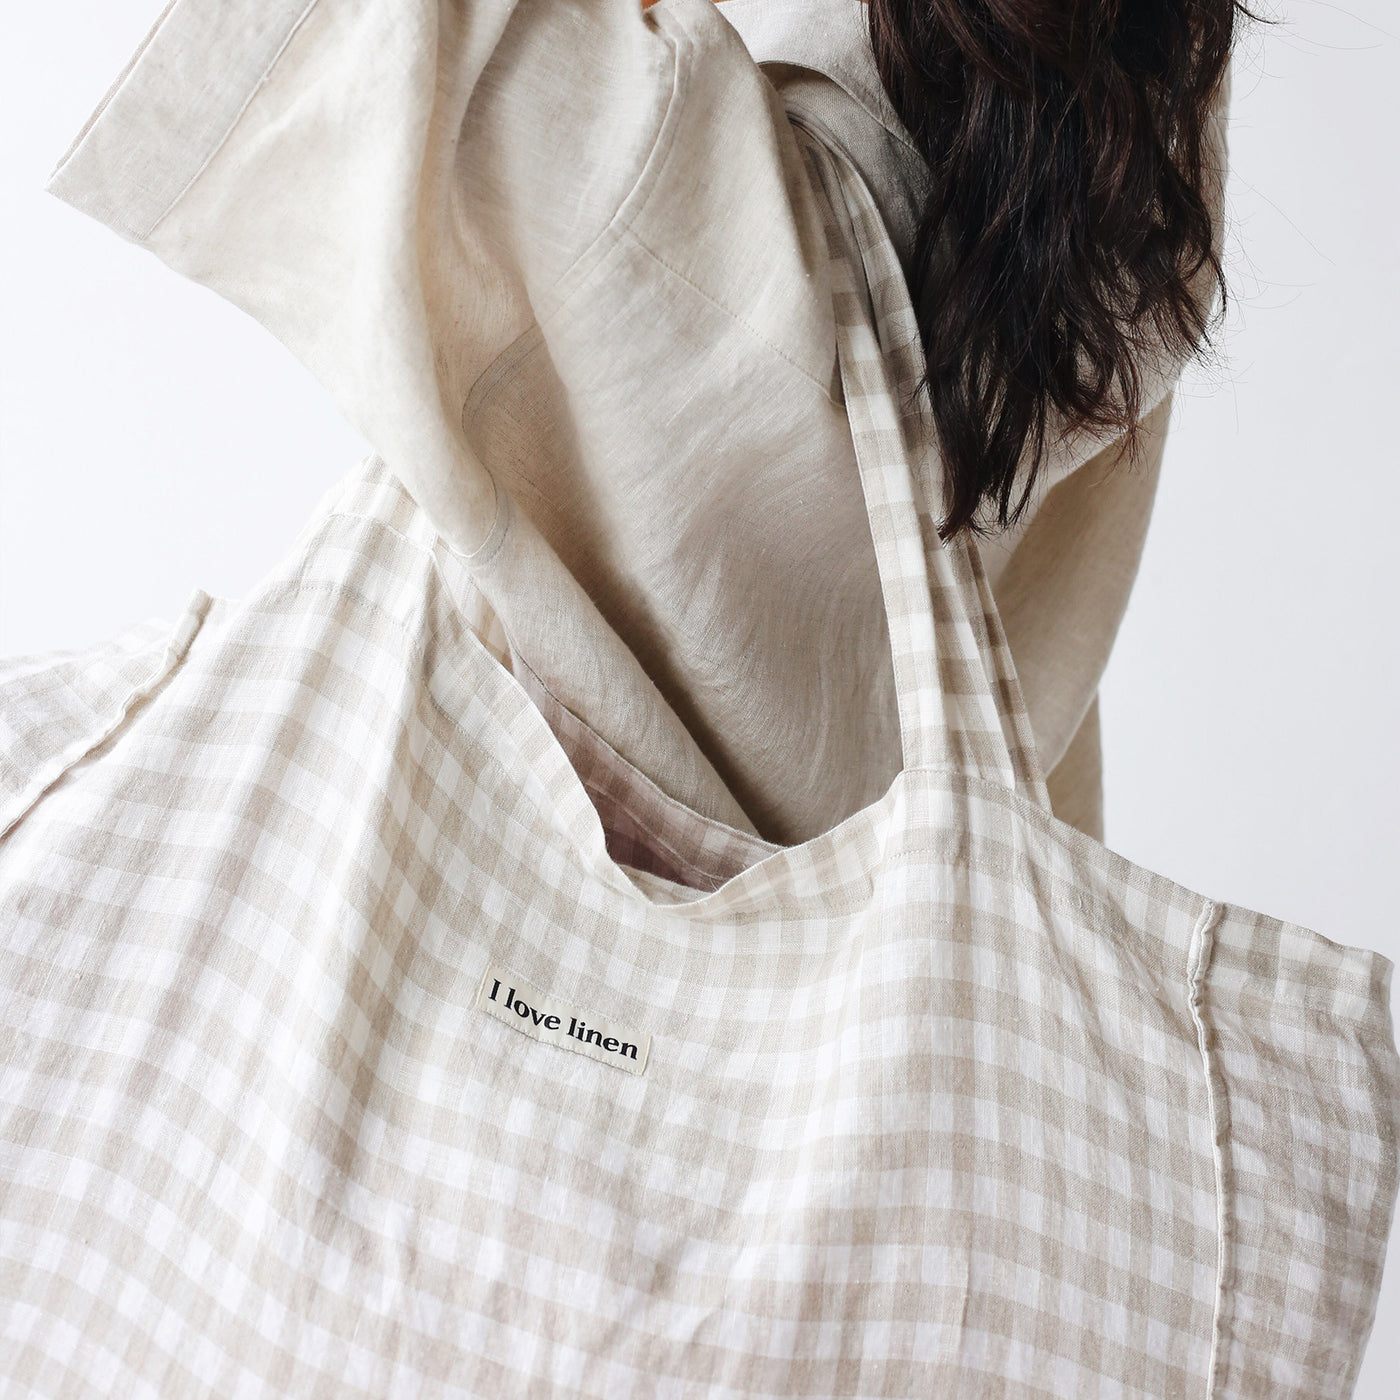 French Flax Linen Carry All Bag in Beige Gingham